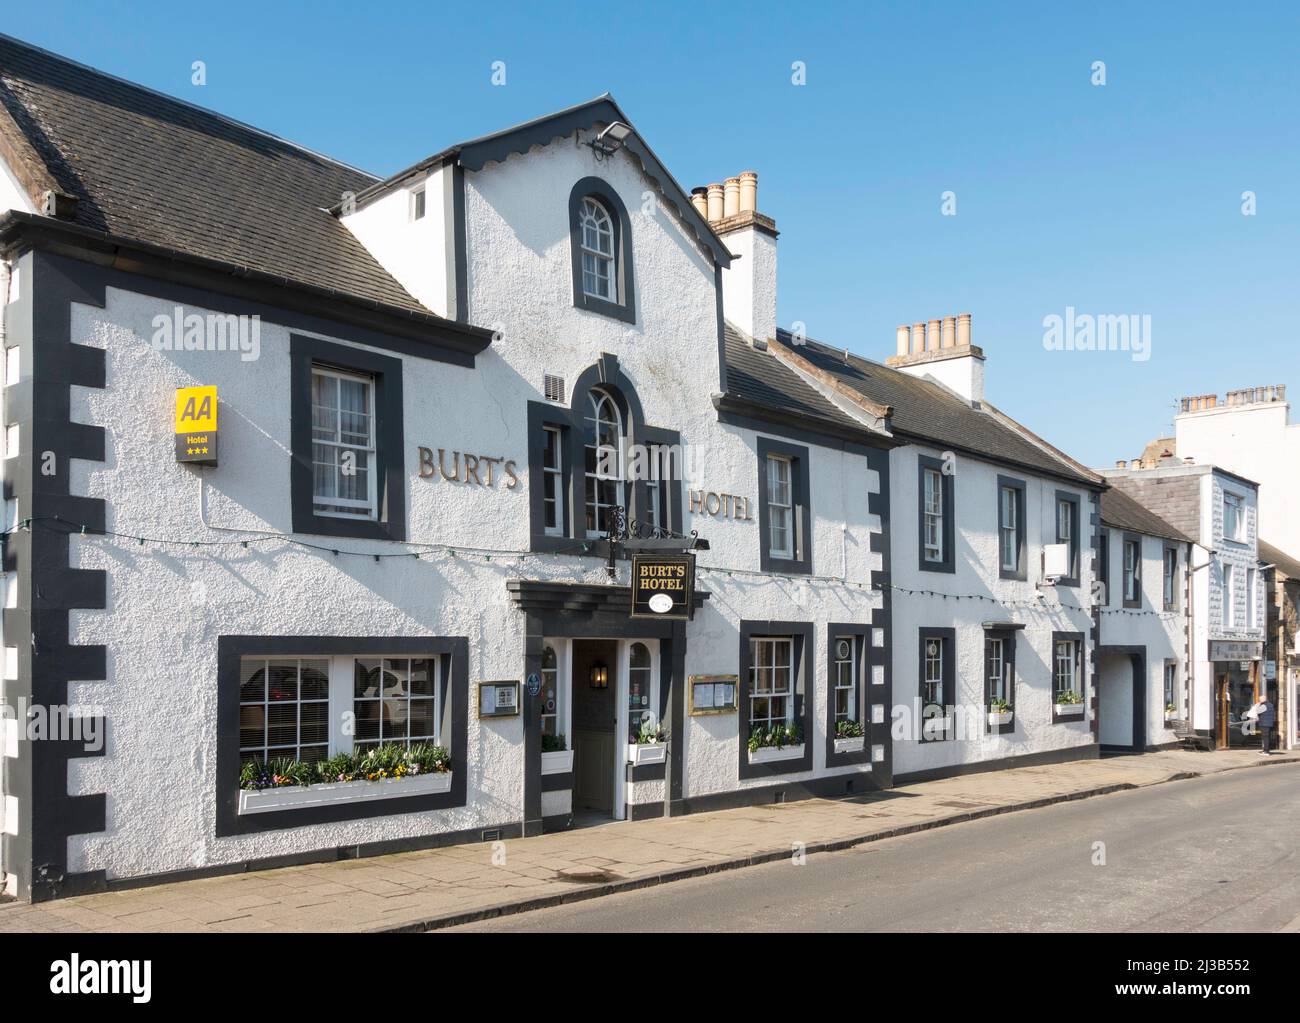 Burt's Hotel, an 18th century listed building in the Market Square, Melrose,  Scottish Borders , Scotland, UK Stock Photo